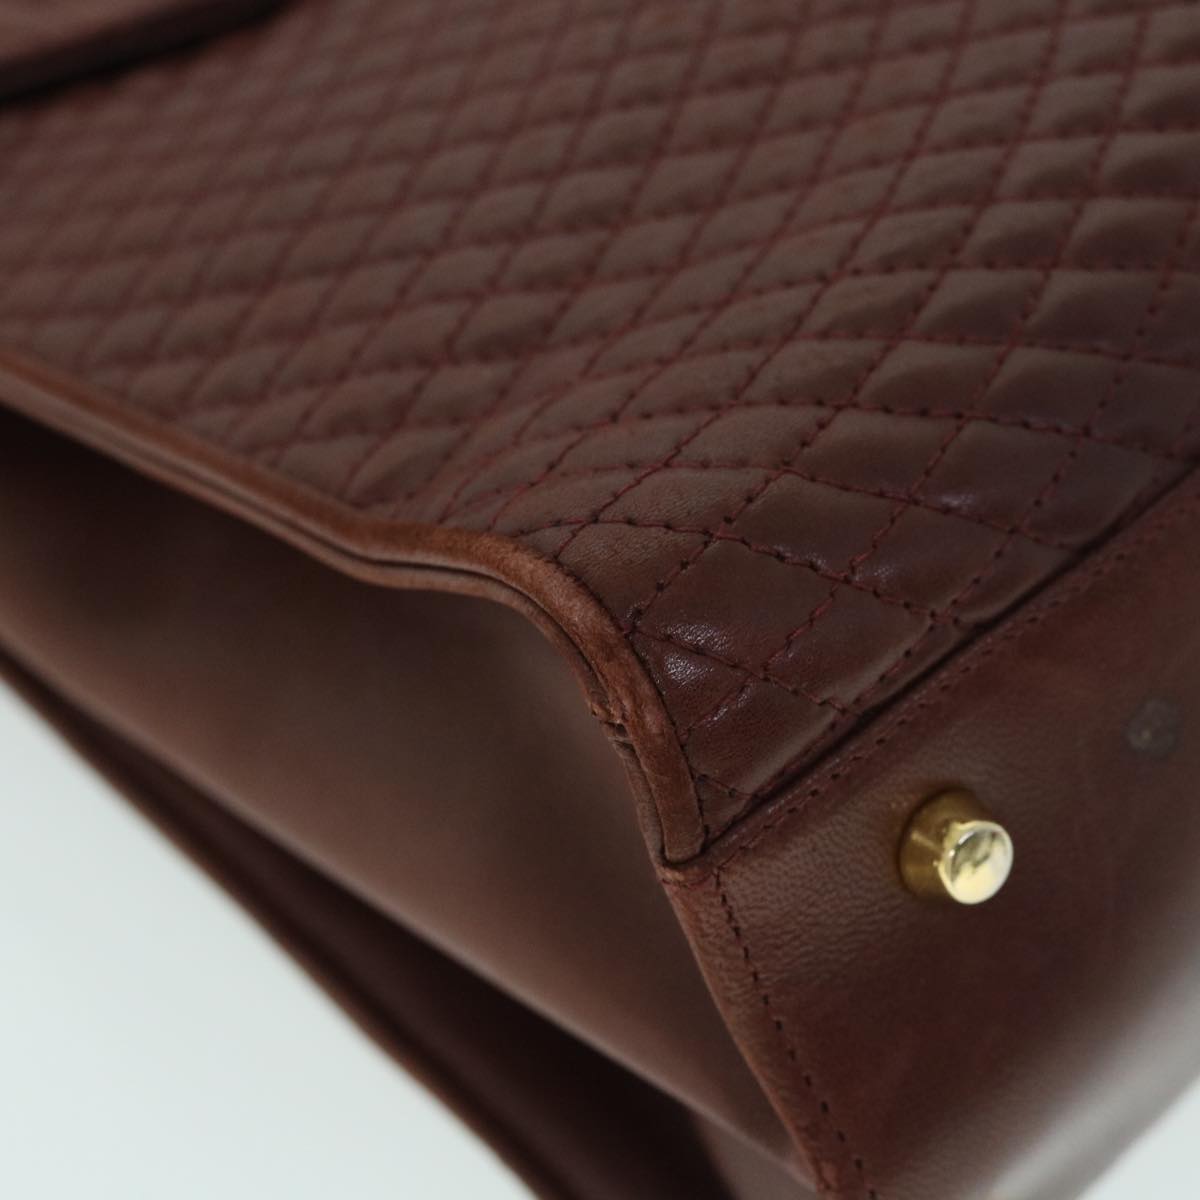 BALLY Quilted Hand Bag Leather Brown Auth 54904